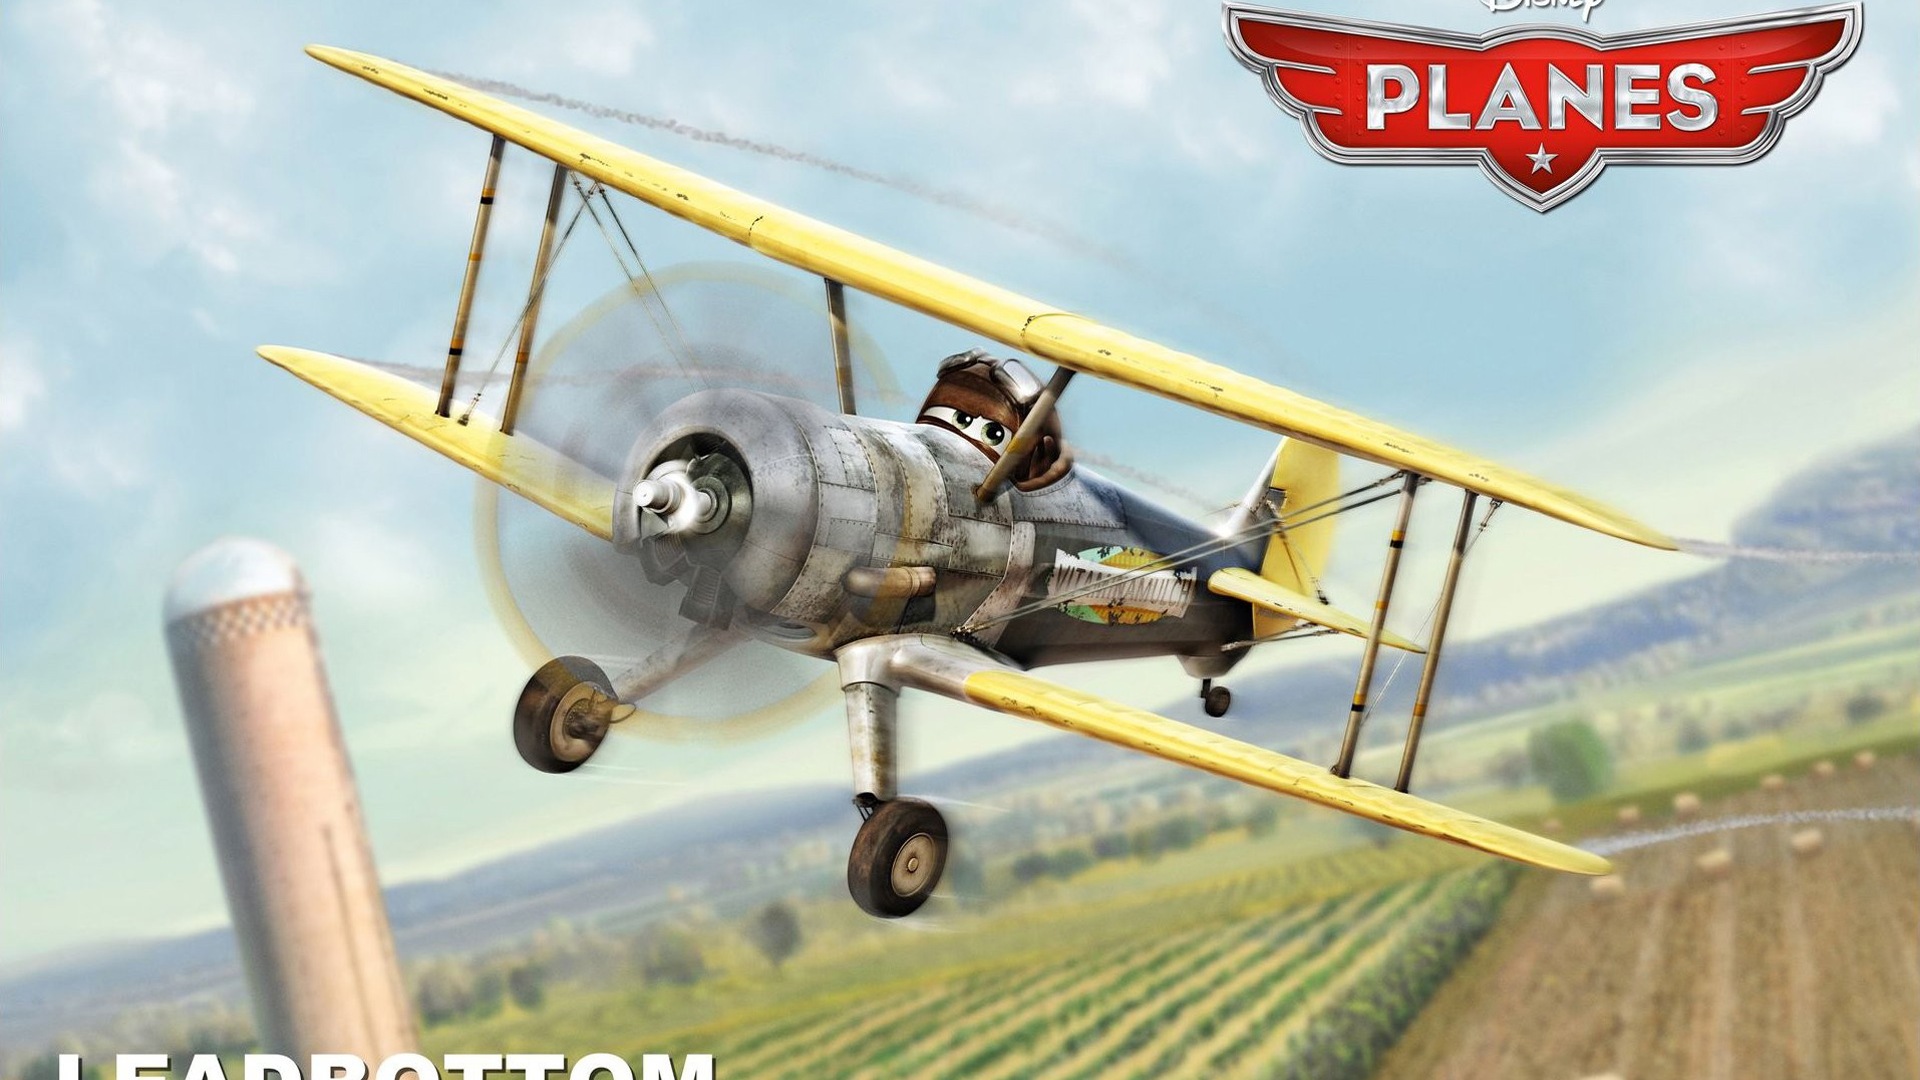 Planes 2013 HD wallpapers #8 - 1920x1080